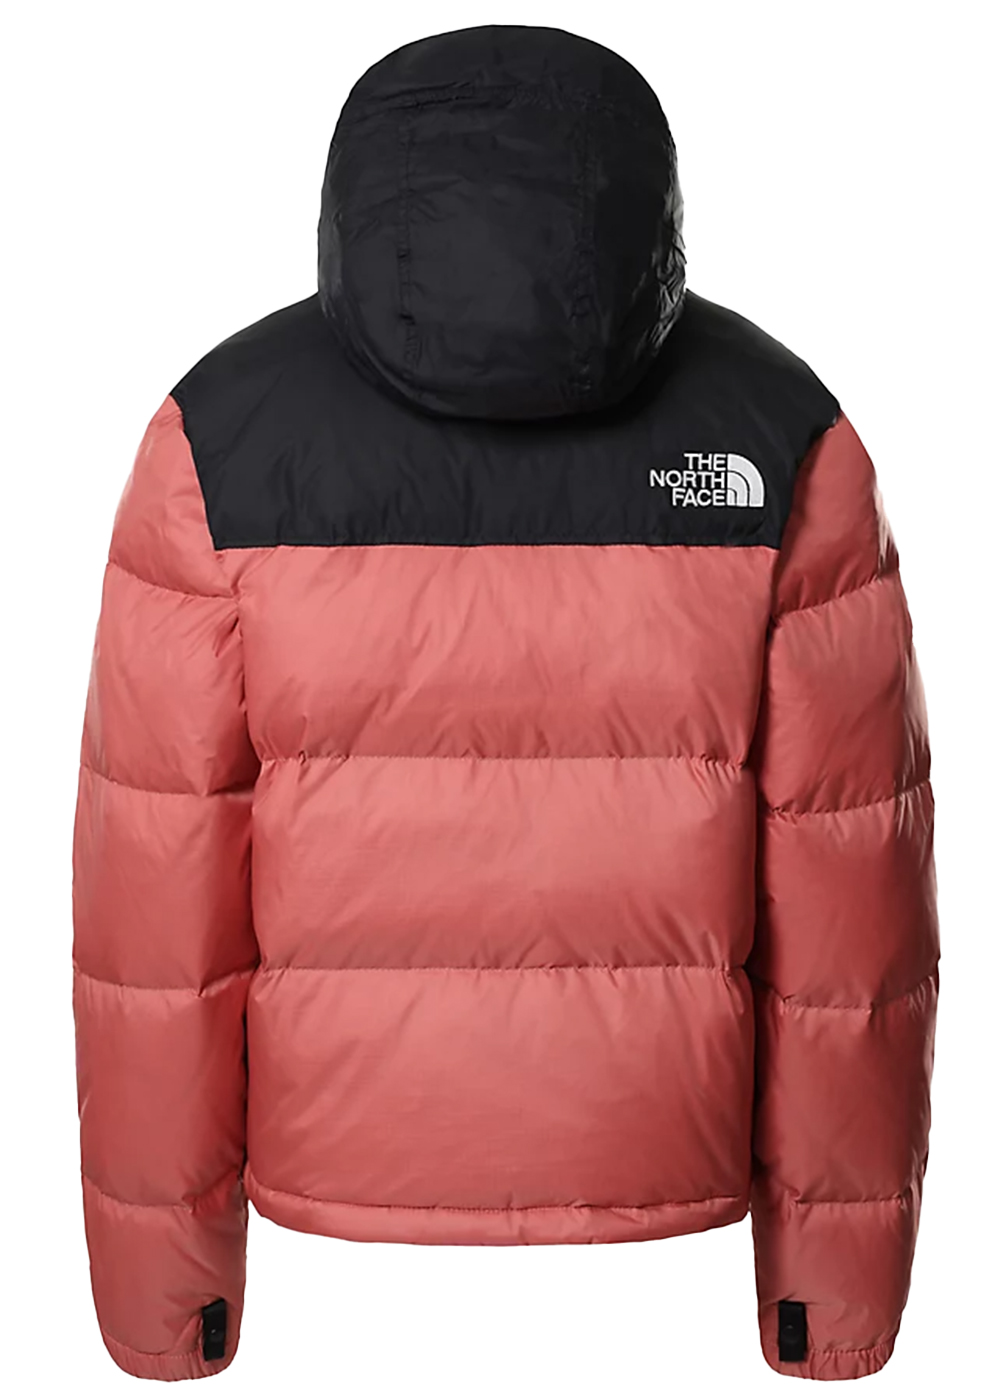 The North Face Womens 1996 Retro Nuptse 700 Fill Packable Jacket Faded Rose